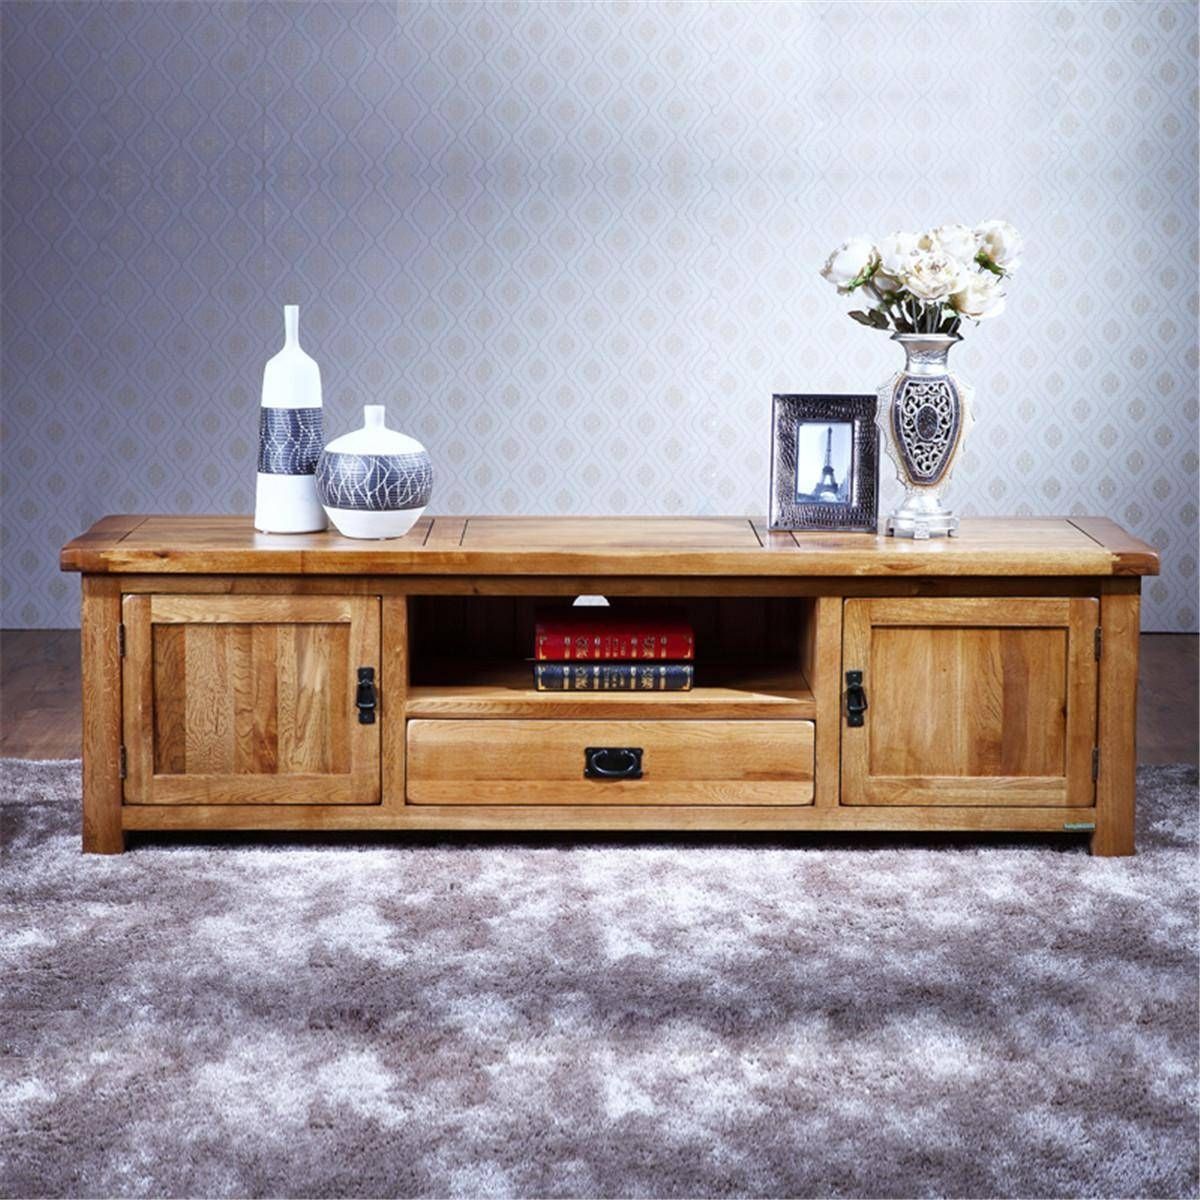 2017 100% Pure Solid Wood Tv Stand Oak Tv Stand Media Console In Wooden Tv Cabinets (View 3 of 15)